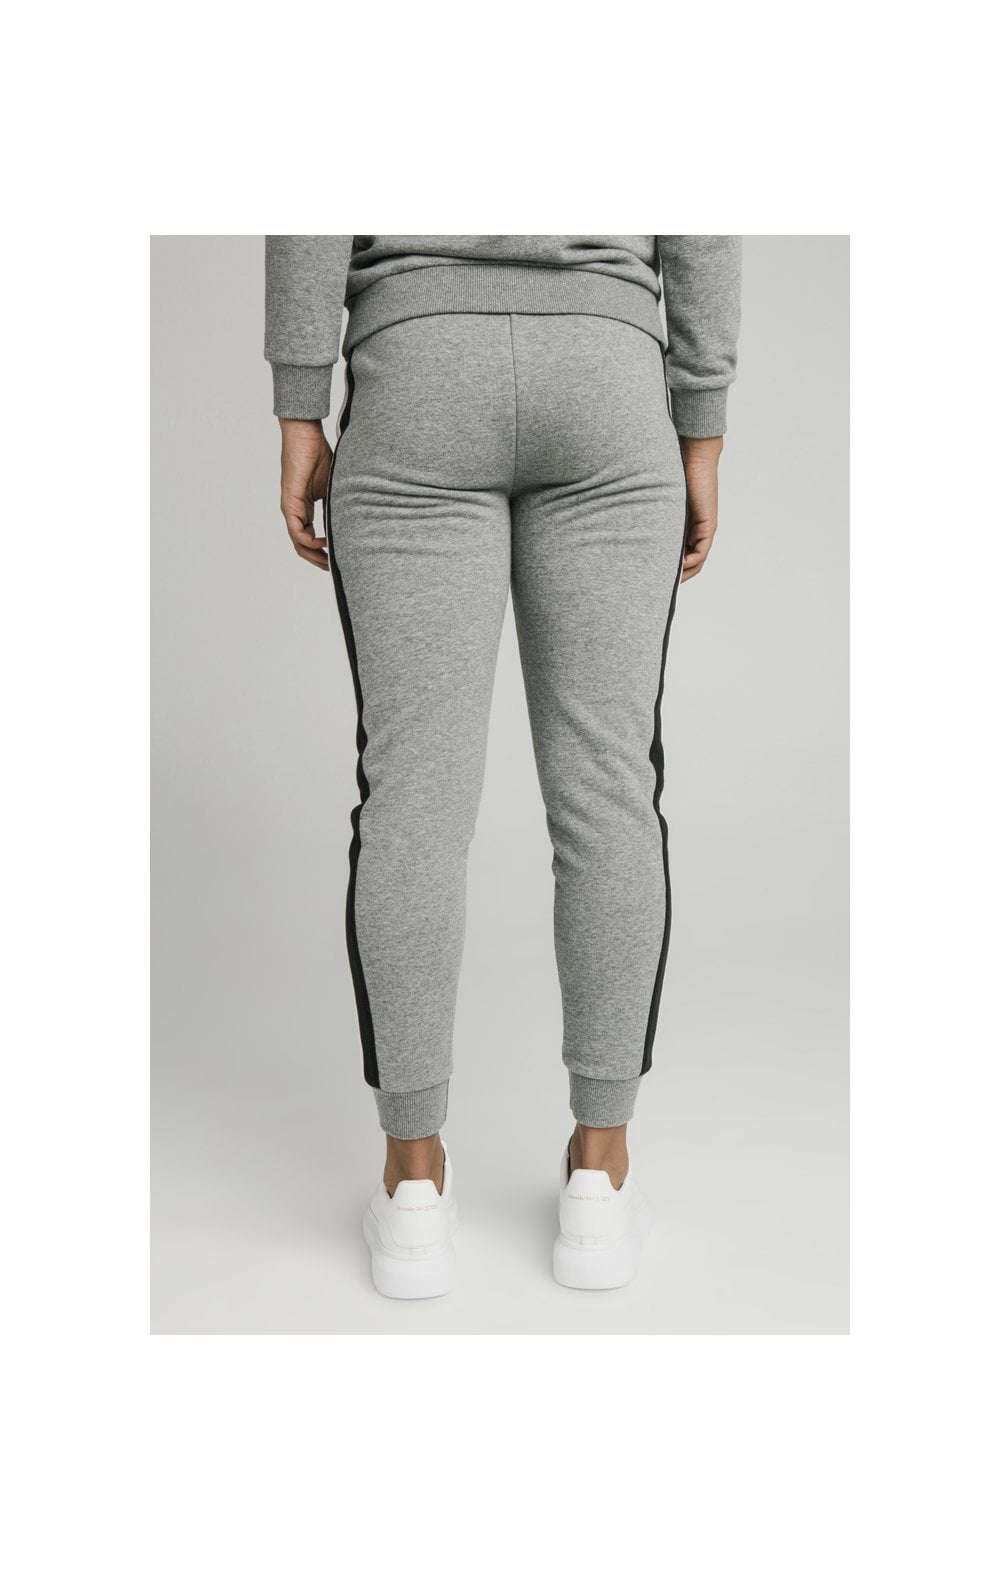 SikSilk Luxe Track Pants - Grey Marl (4)